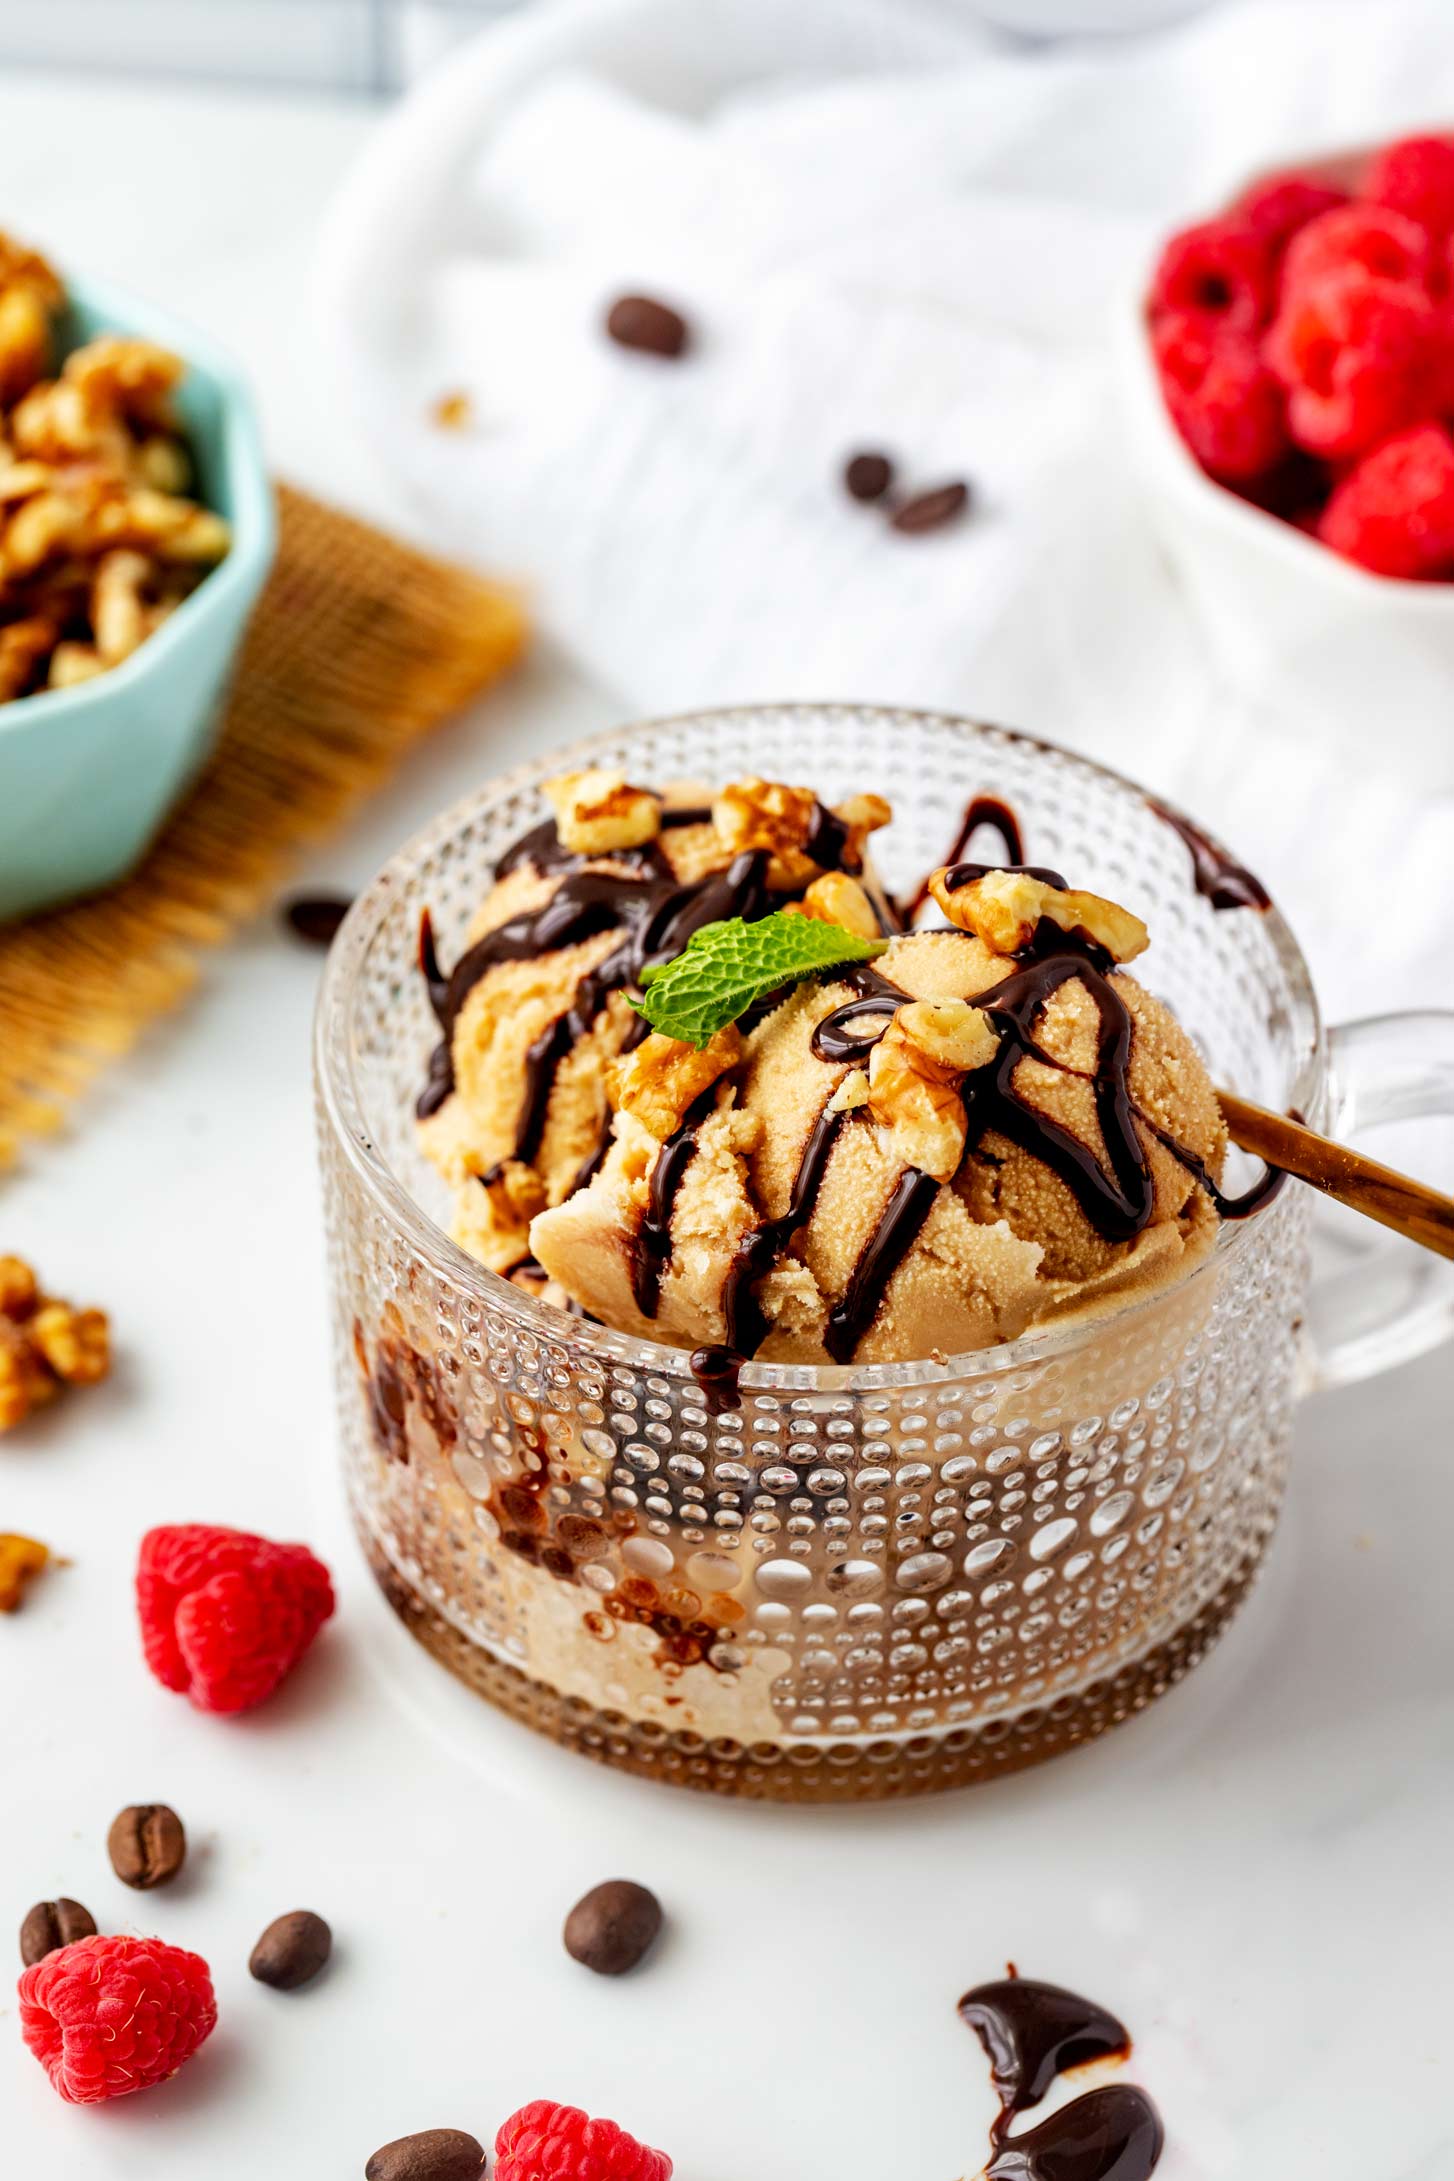 A glass coffee mug with Ninja Creami coffee ice cream in it drizzled with chocolate sauce and topped with walnuts.